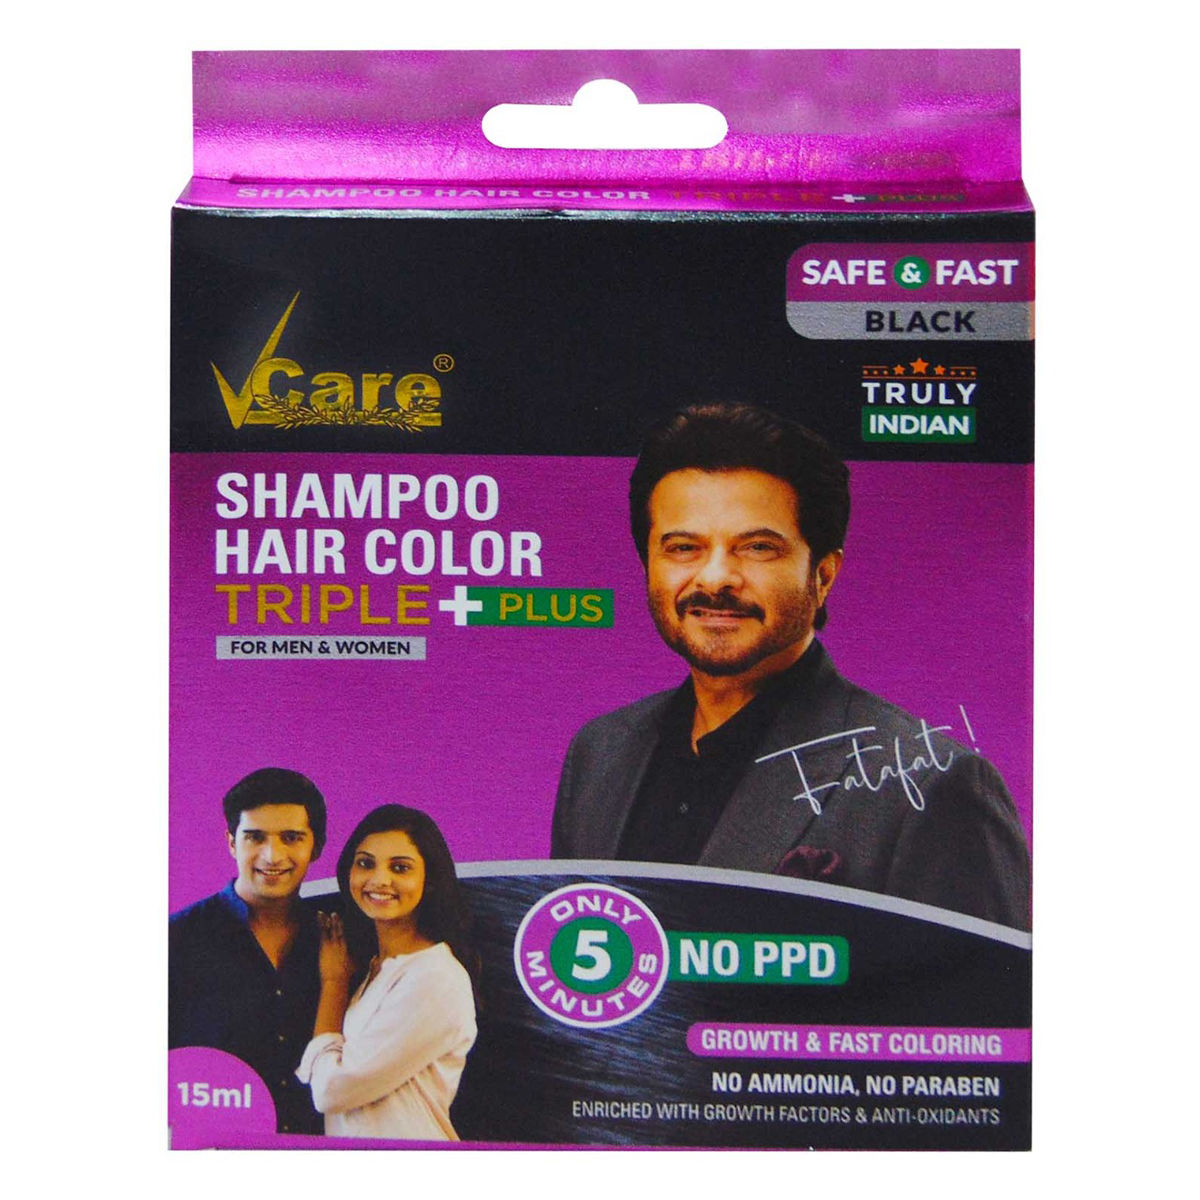 Buy VCare Shampoo Hair Colour Shampoo-Black 180ml for Women and Men |Pump  pack with Natural extracts | Colours hair in minutes|Enriched with growth  factors & antioxidants, Ammonia free, Sulphate free Online at